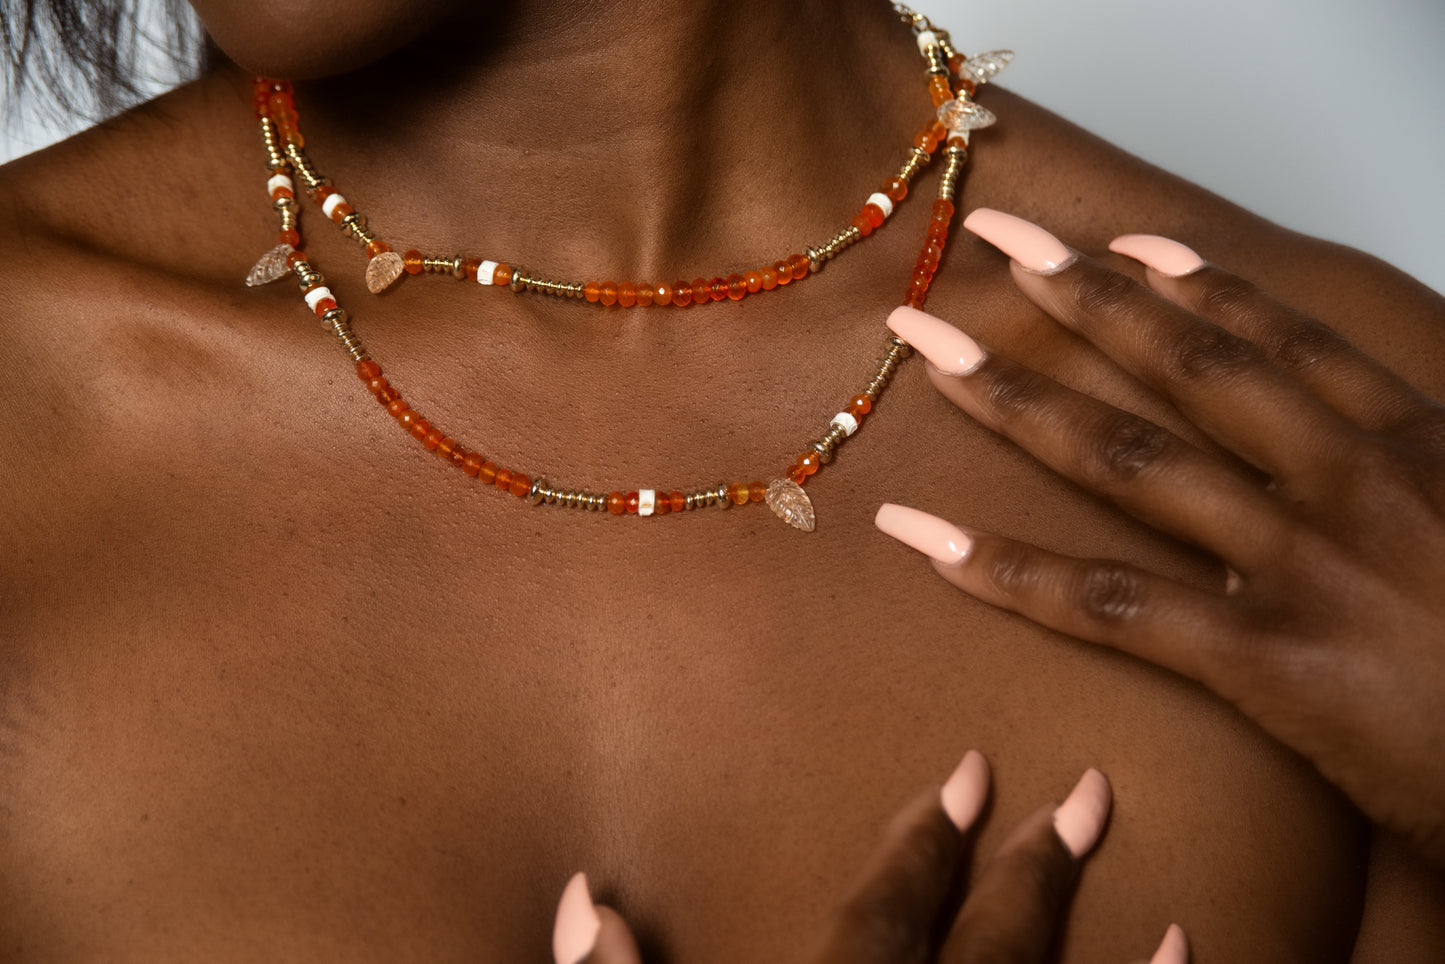 A woman wearing the "Awaken" necklace from the brand "Ilium Wing" with vibrant orange and shimmering gold beads, evoking the energy of the Sacral Chakra and igniting a playful fire within.